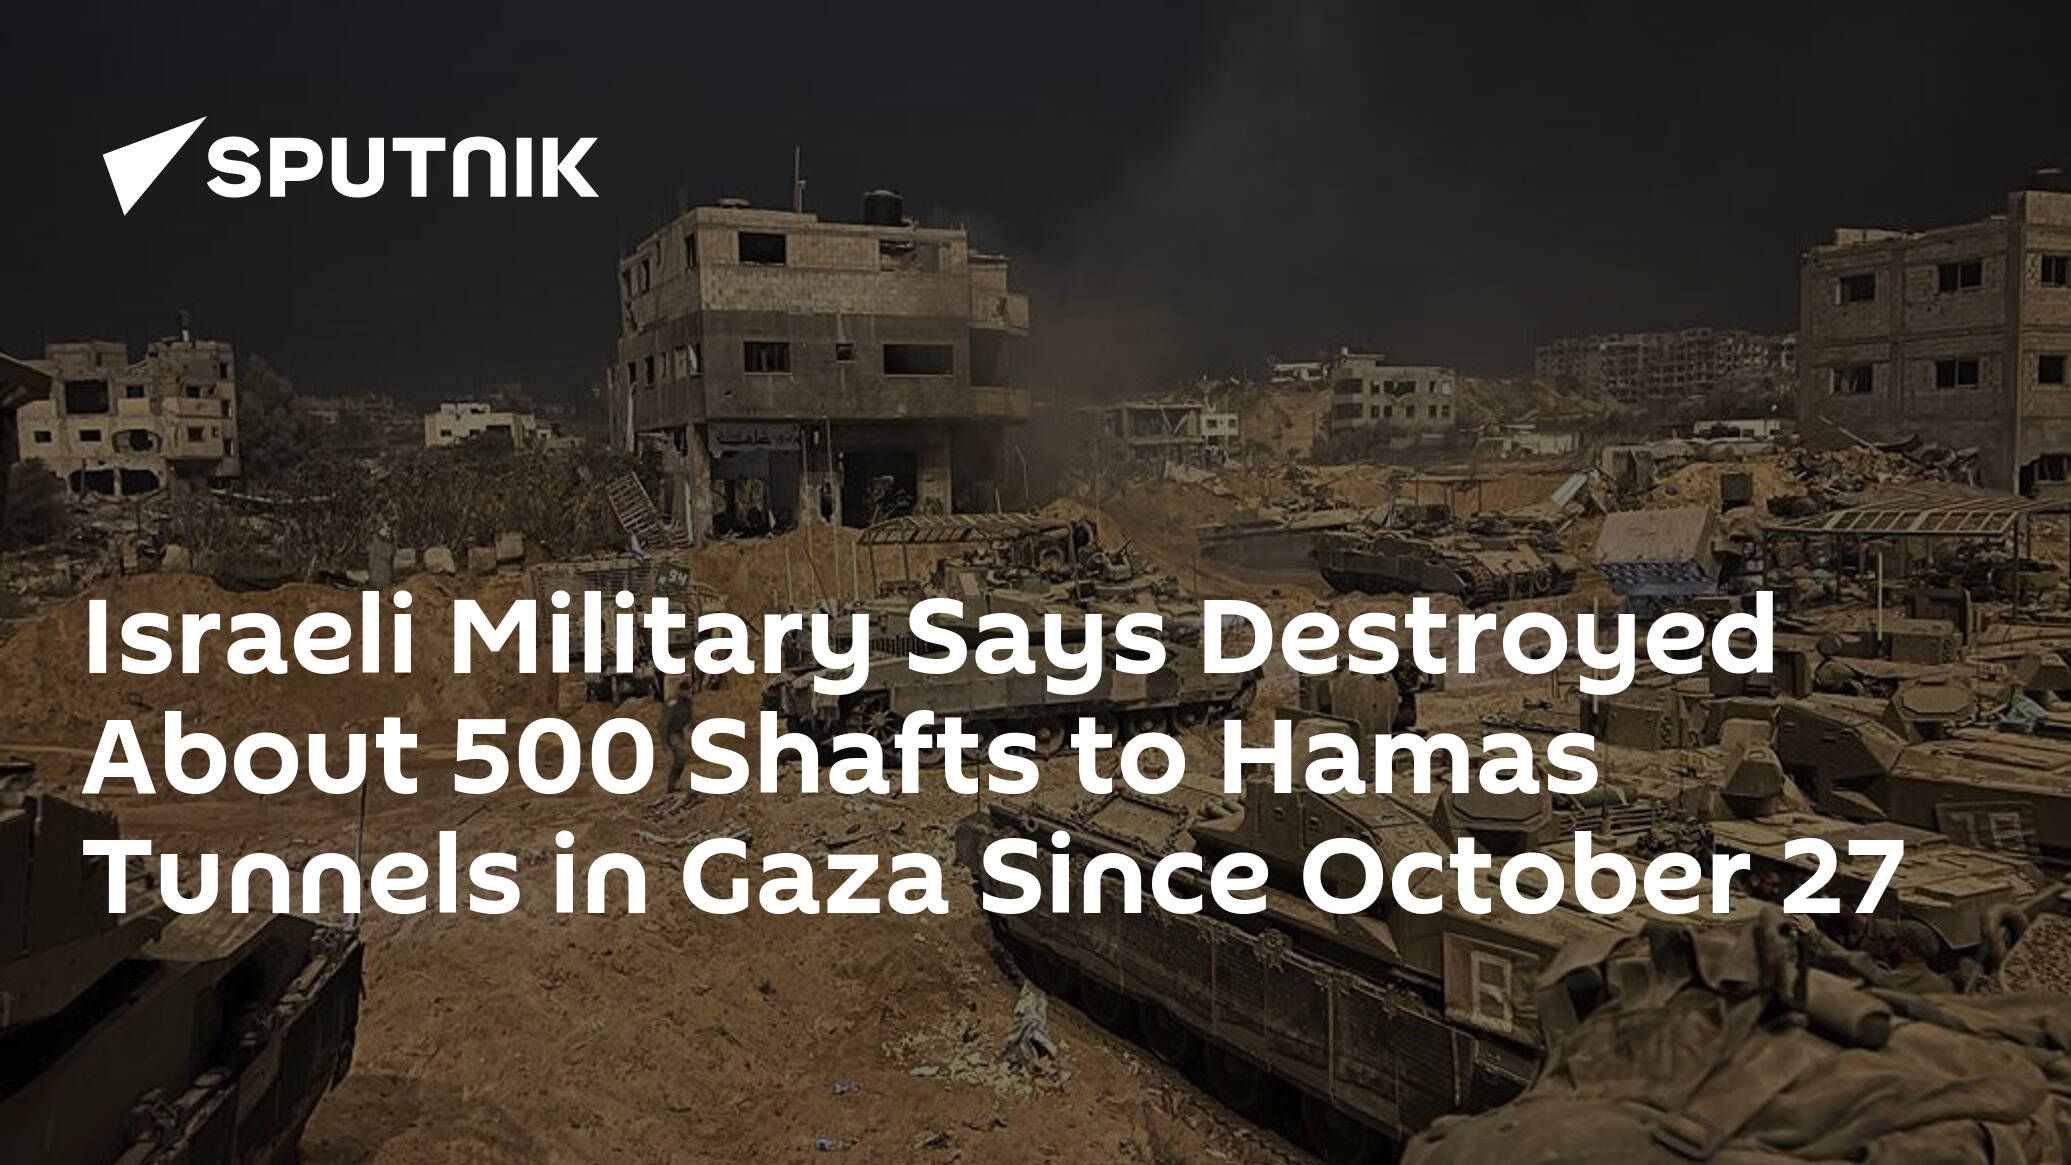 Israeli Military Says Destroyed About 500 Shafts to Hamas Tunnels in Gaza Since October 27